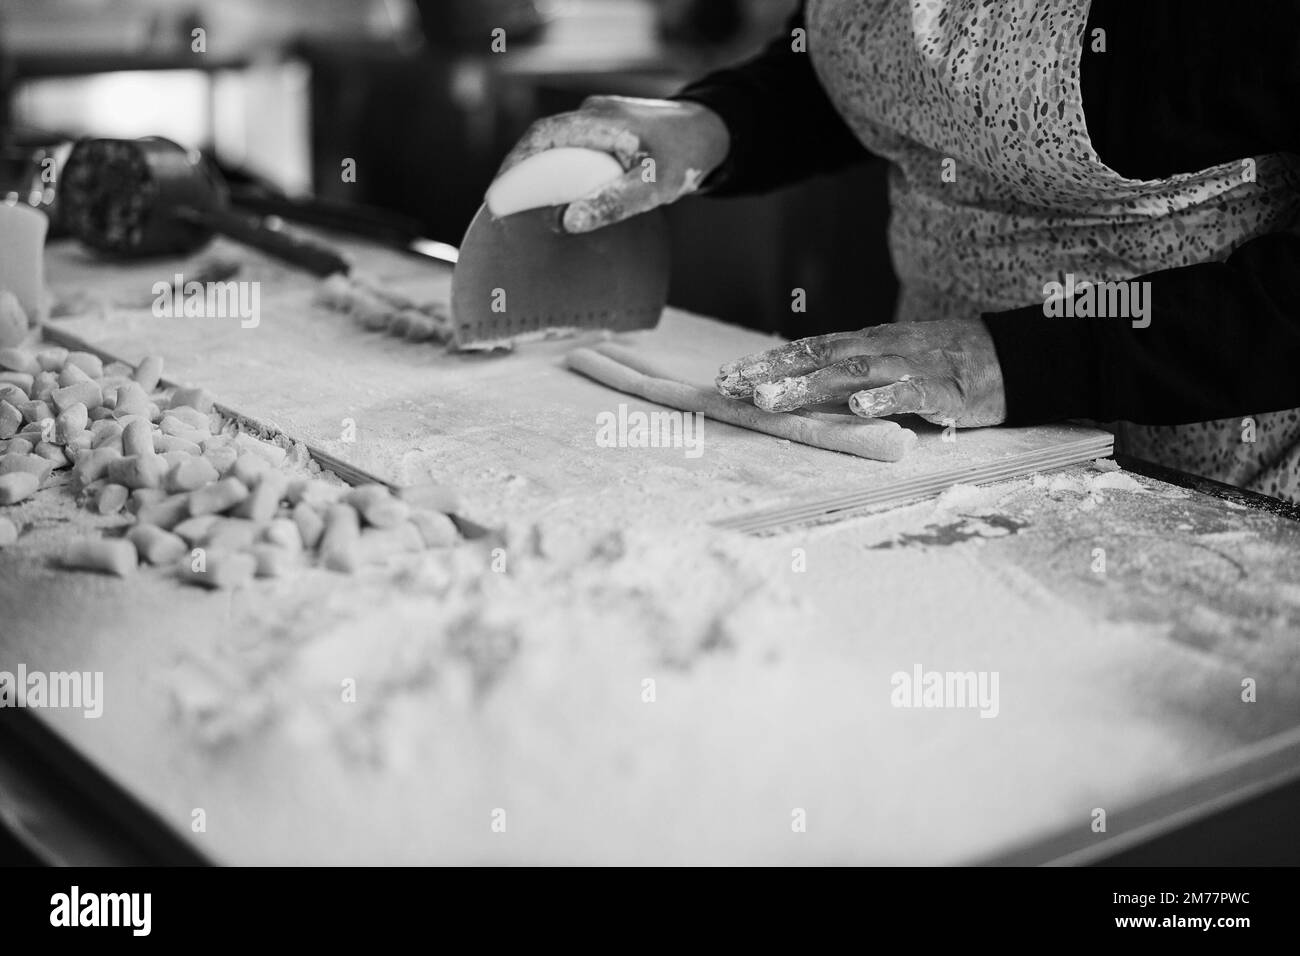 Woman preparing dough for gnocchi inside pasta factory - Soft focus on right hand - Black and white editing Stock Photo